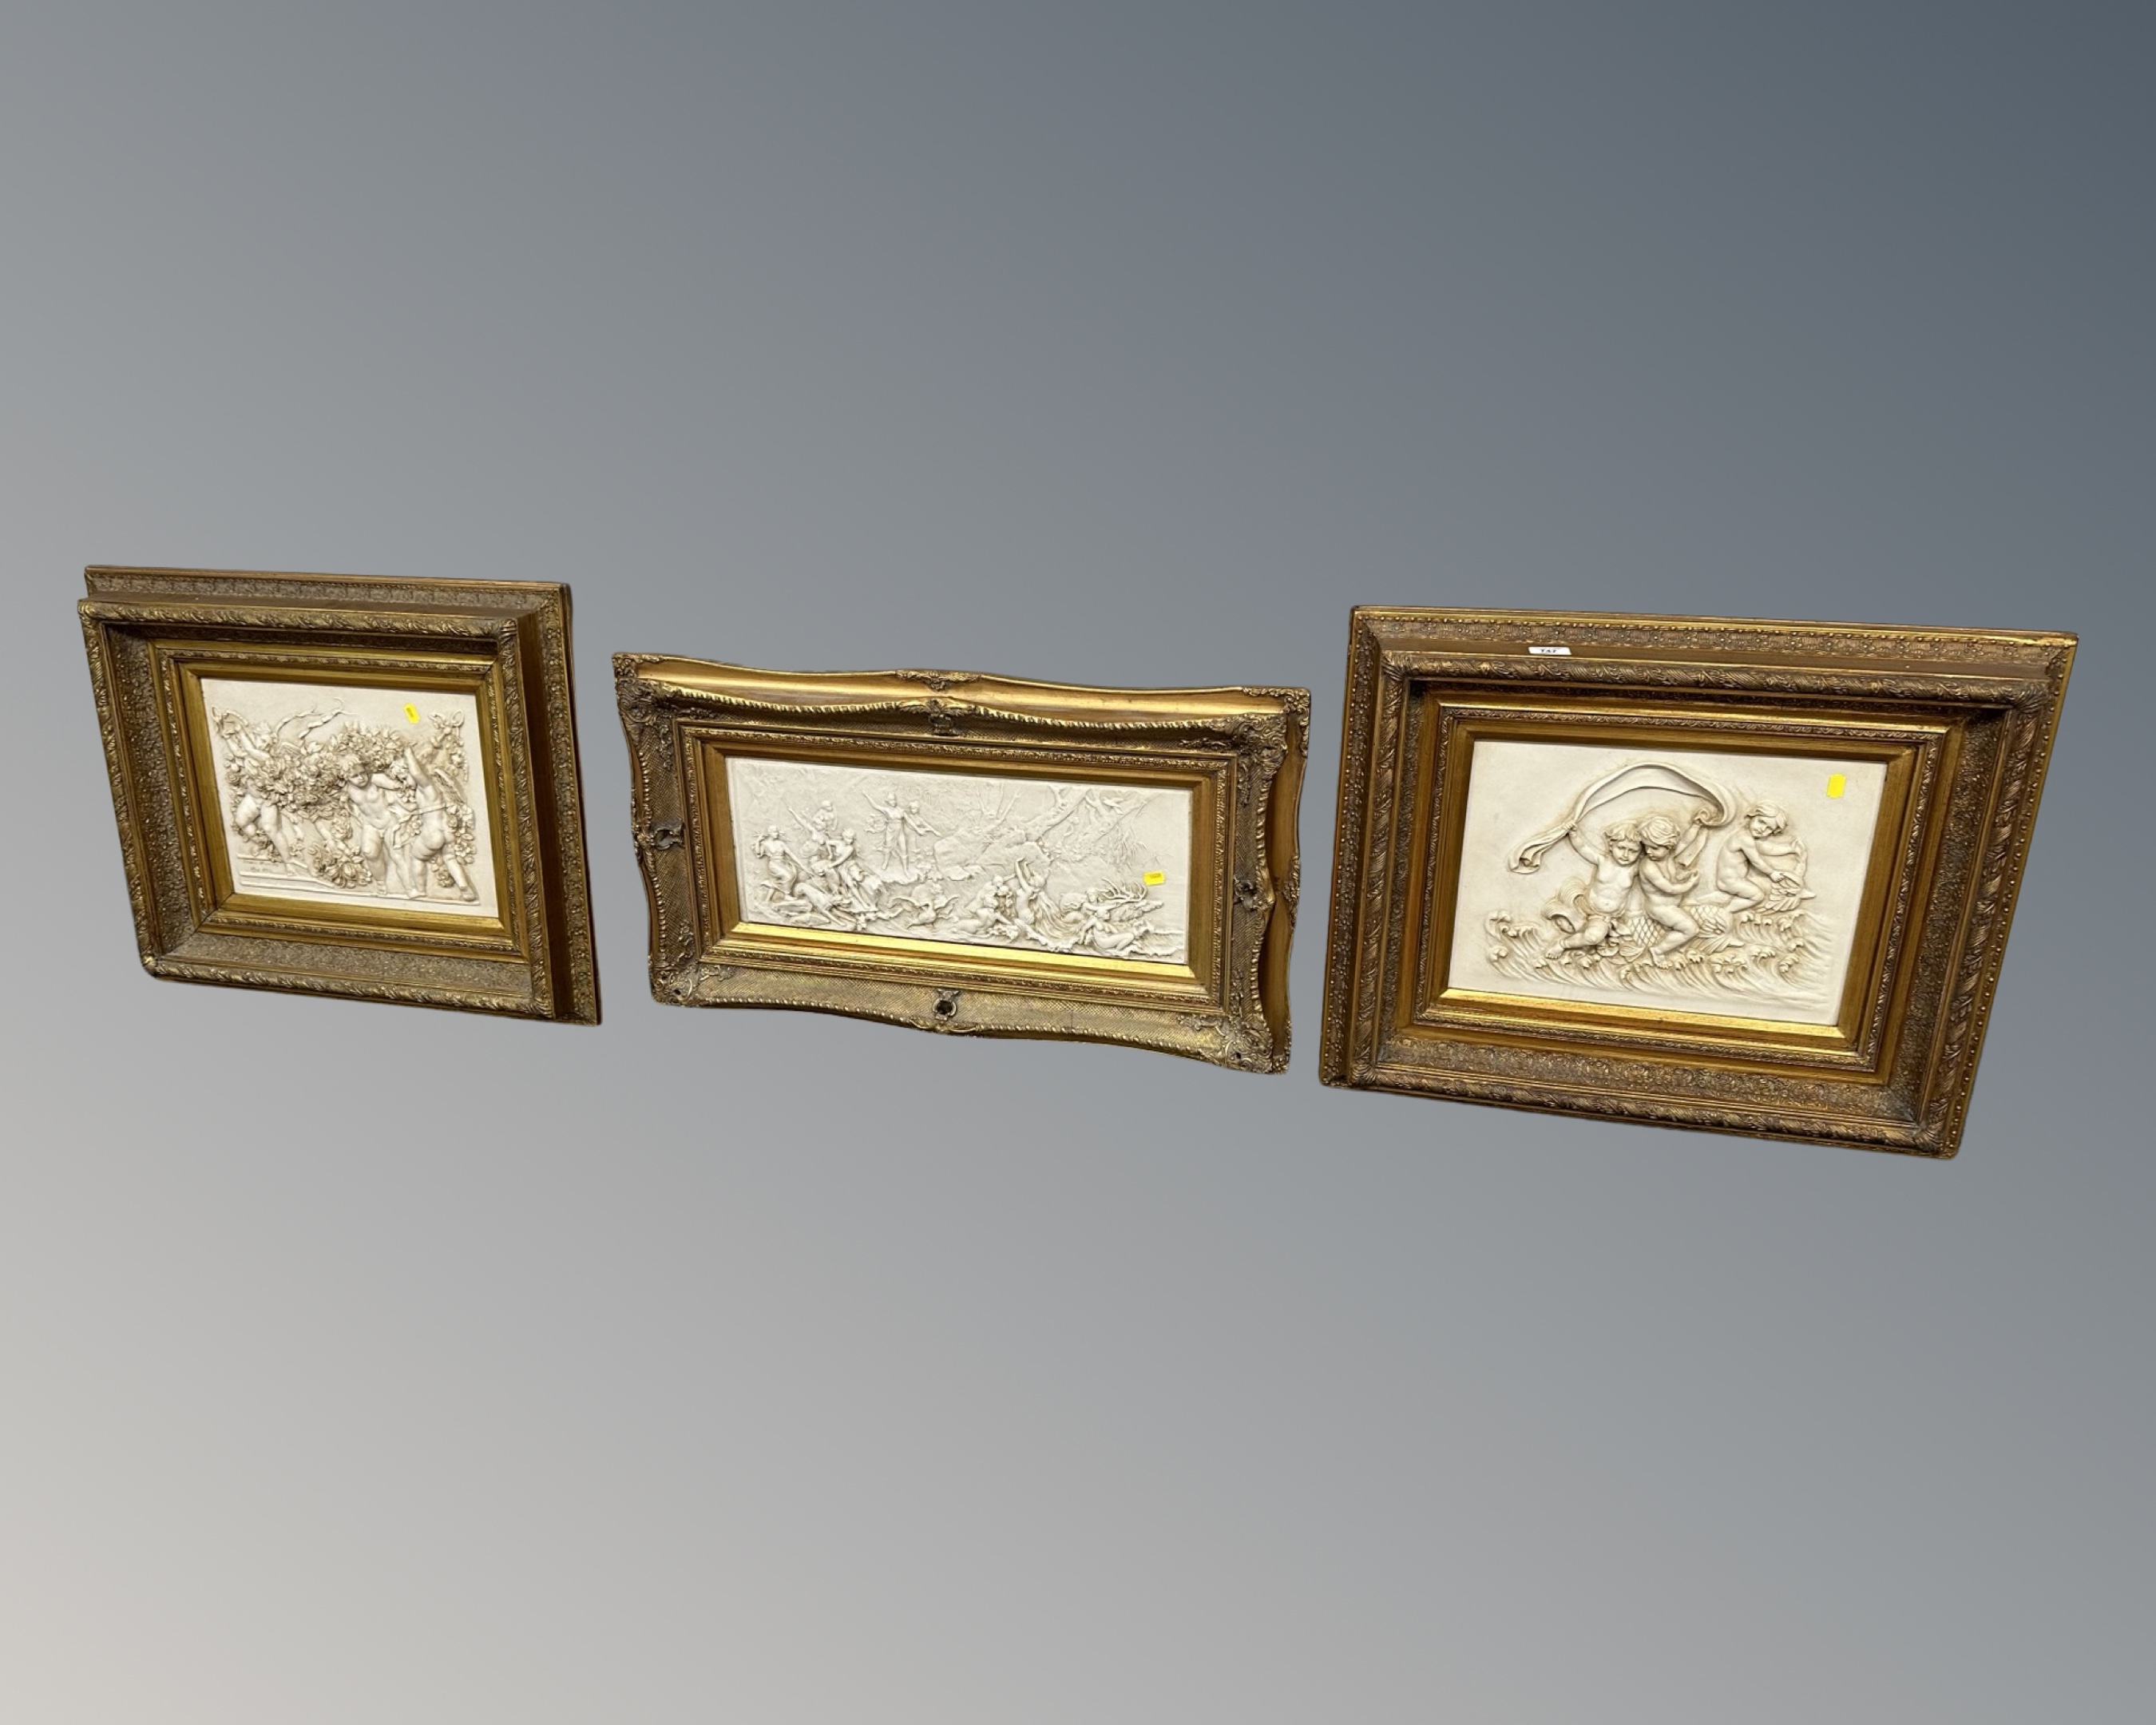 Three gilt framed relief plaques depicting cherubs, largest measures 83cm wide.